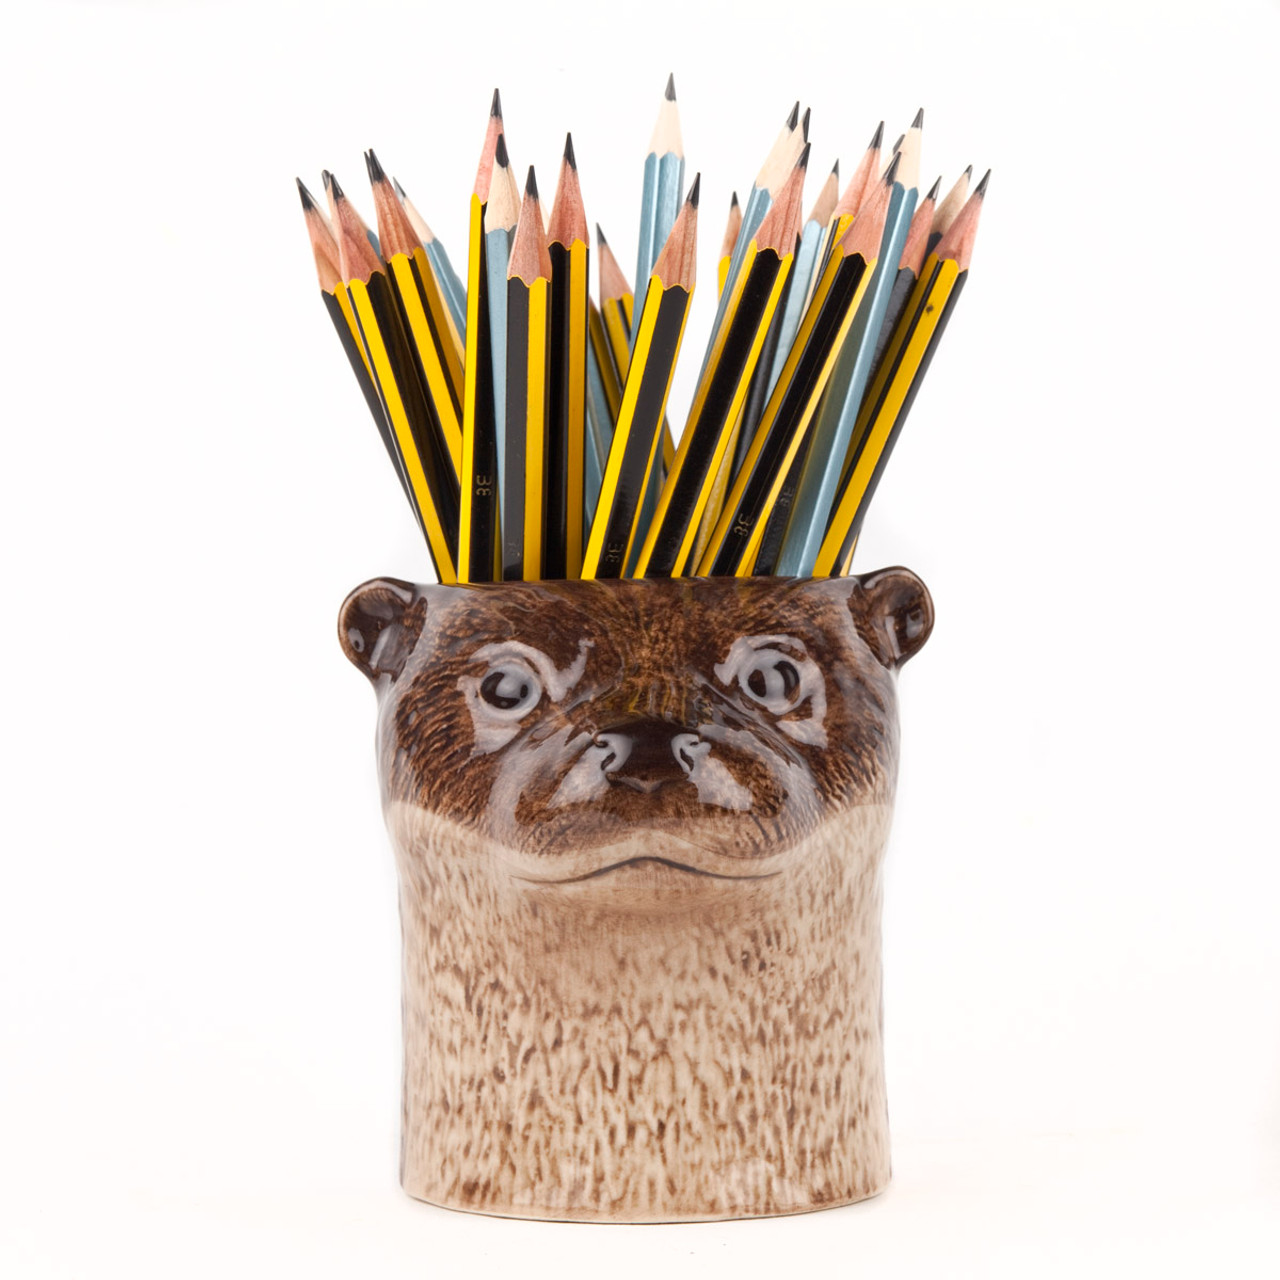 front view of an otter head pot holding pencils